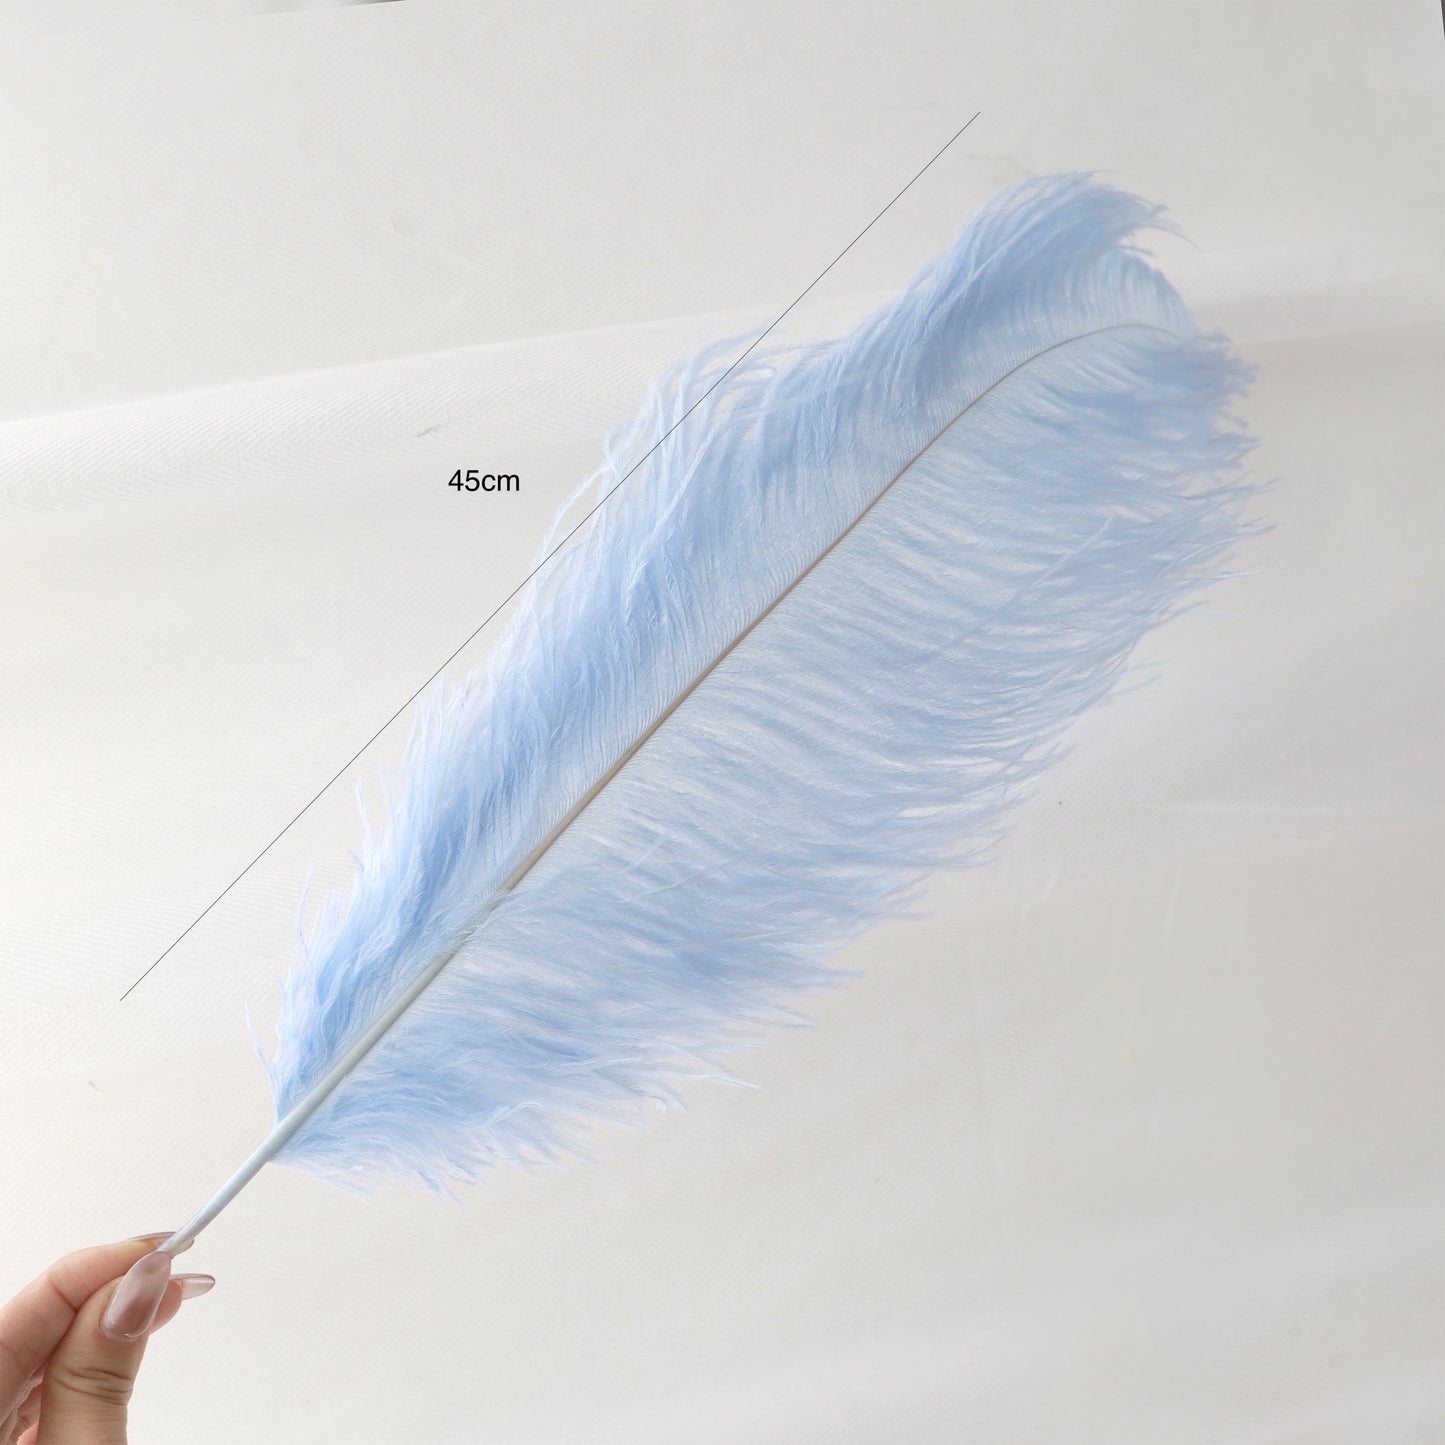 5 pcs Ostrich Feathers Baby Blue